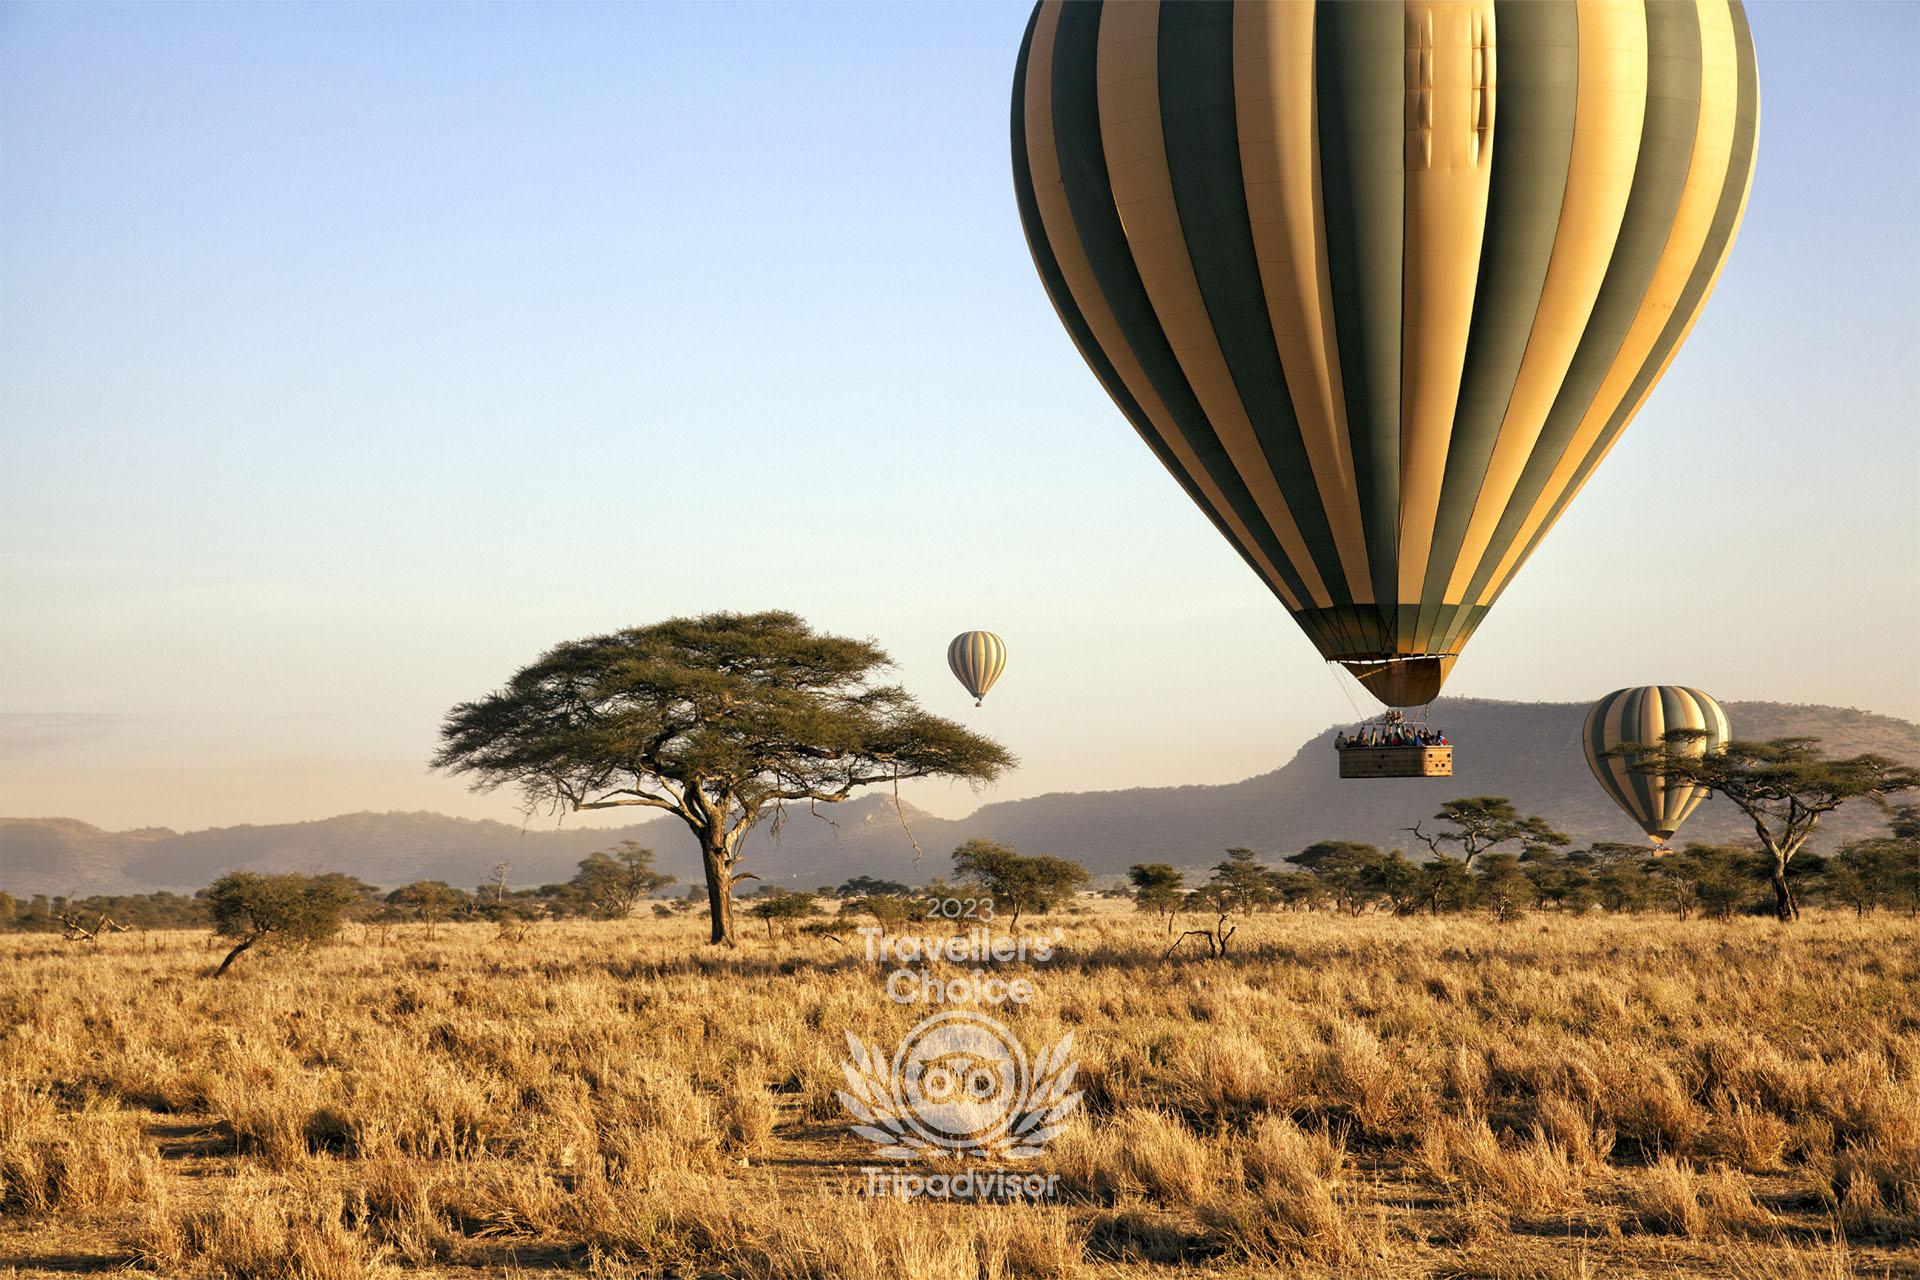 Once the Balloon rises with the sun, the early wake-up call will begin to make perfect sense. Each journey is different, the route of the Balloon determined by the direction of the wind. As the Serengeti expands in magnificence before your eyes, the skilled pilots will guide the Balloon towards wildlife on the ground. A Champagne breakfast and toast to your return to Earth can be enjoyed under the canopy of an Acacia tree in the middle of Serengeti wilderness